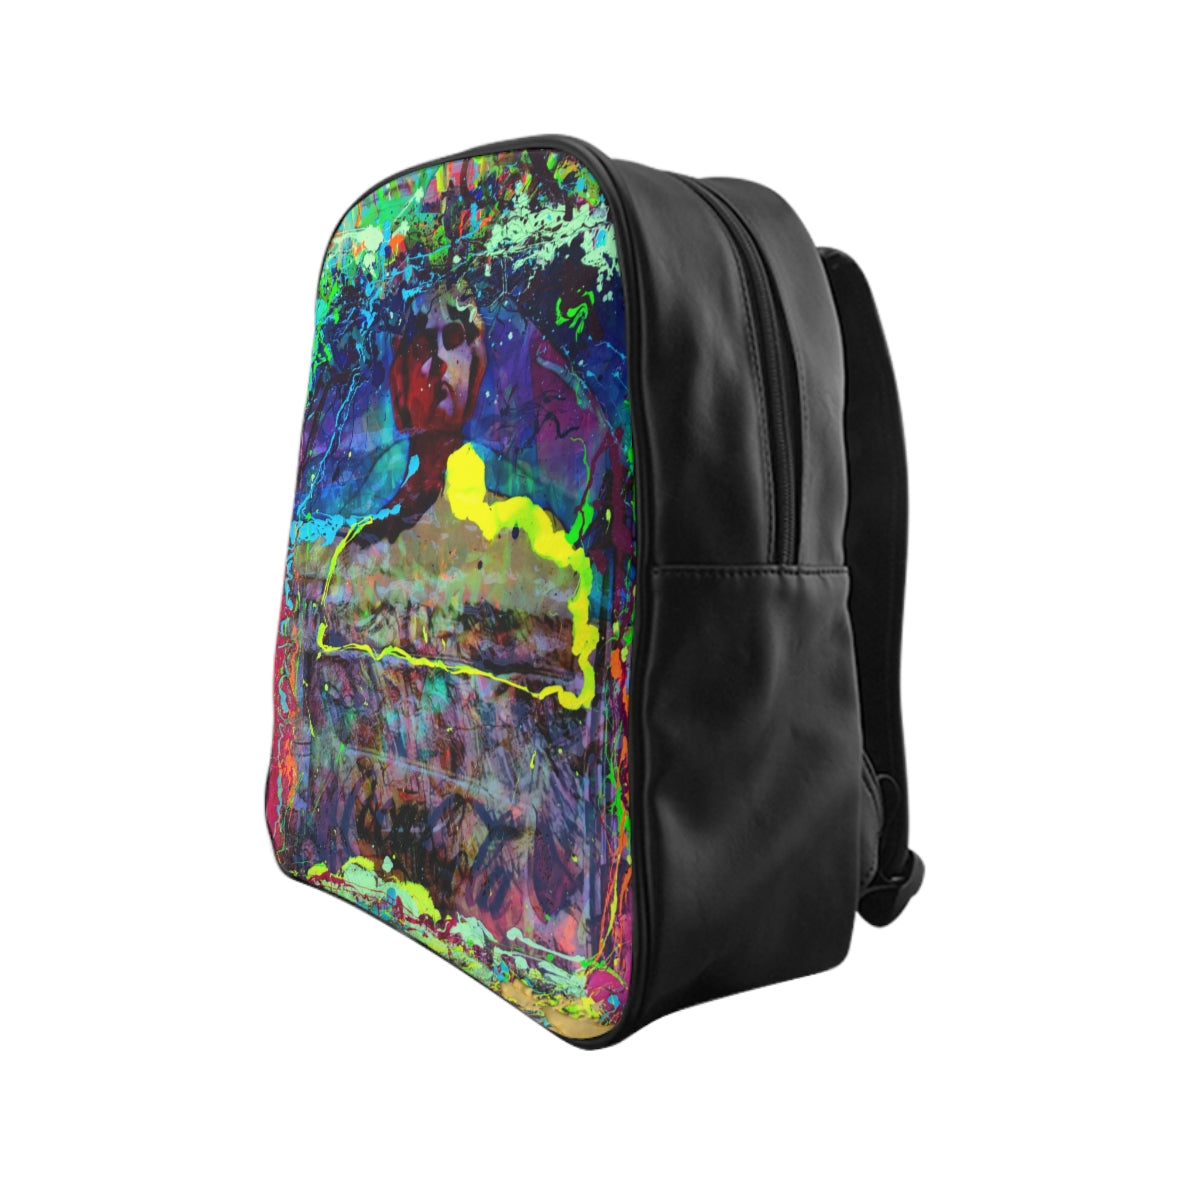 Getrott Eddy Bogaert Halloween statue Coca Cola Graffiti Art Collection Poster 2 Black School Backpack Carry-On Travel Check Luggage 4-Wheel Spinner Suitcase Bag Multiple Colors and Sizes